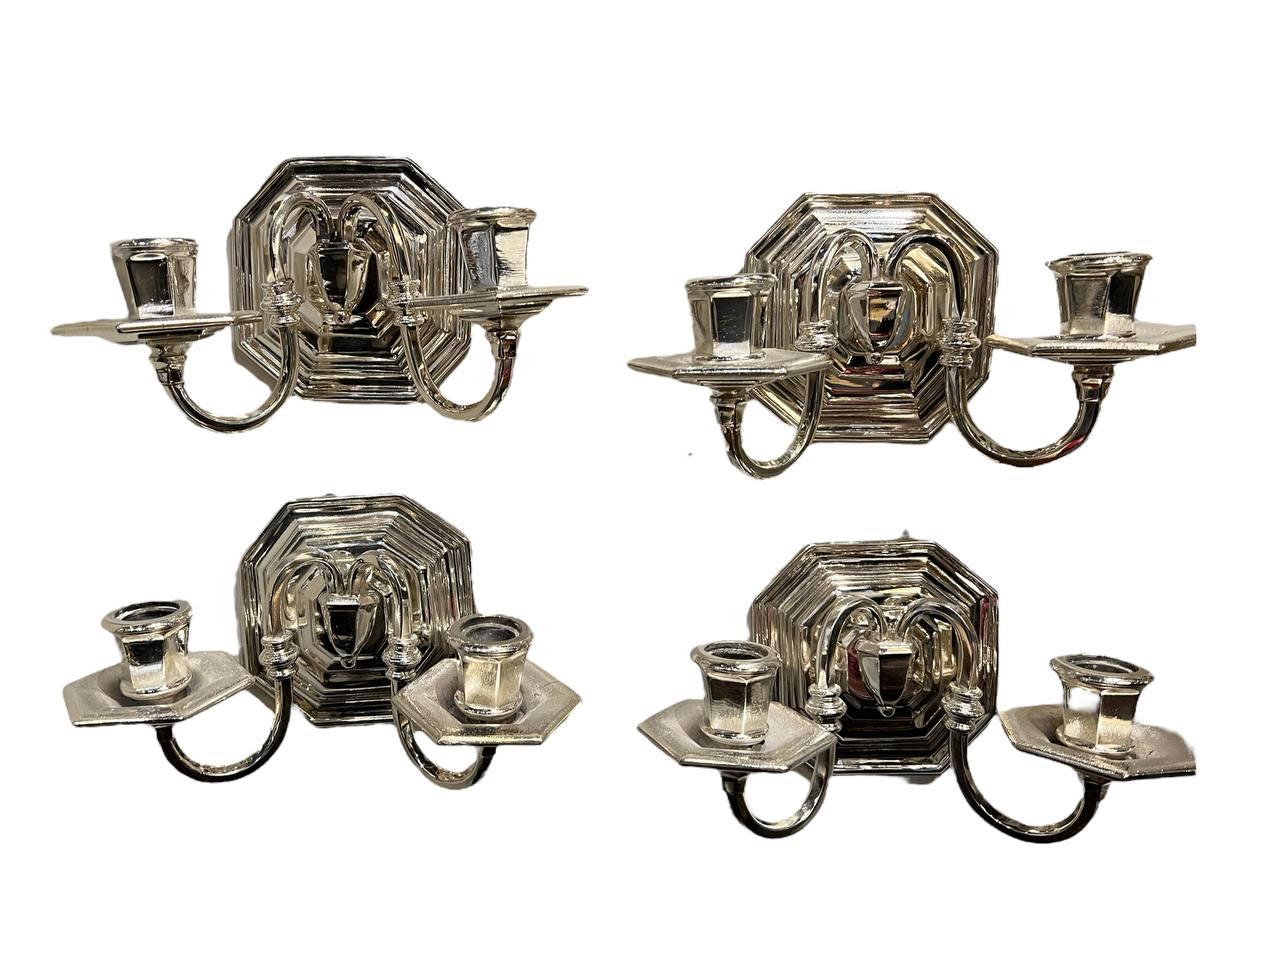 A pair of circa 1900 silver plated Caldwell double light sconces, unusual design. Perfect for hallway or bathroom